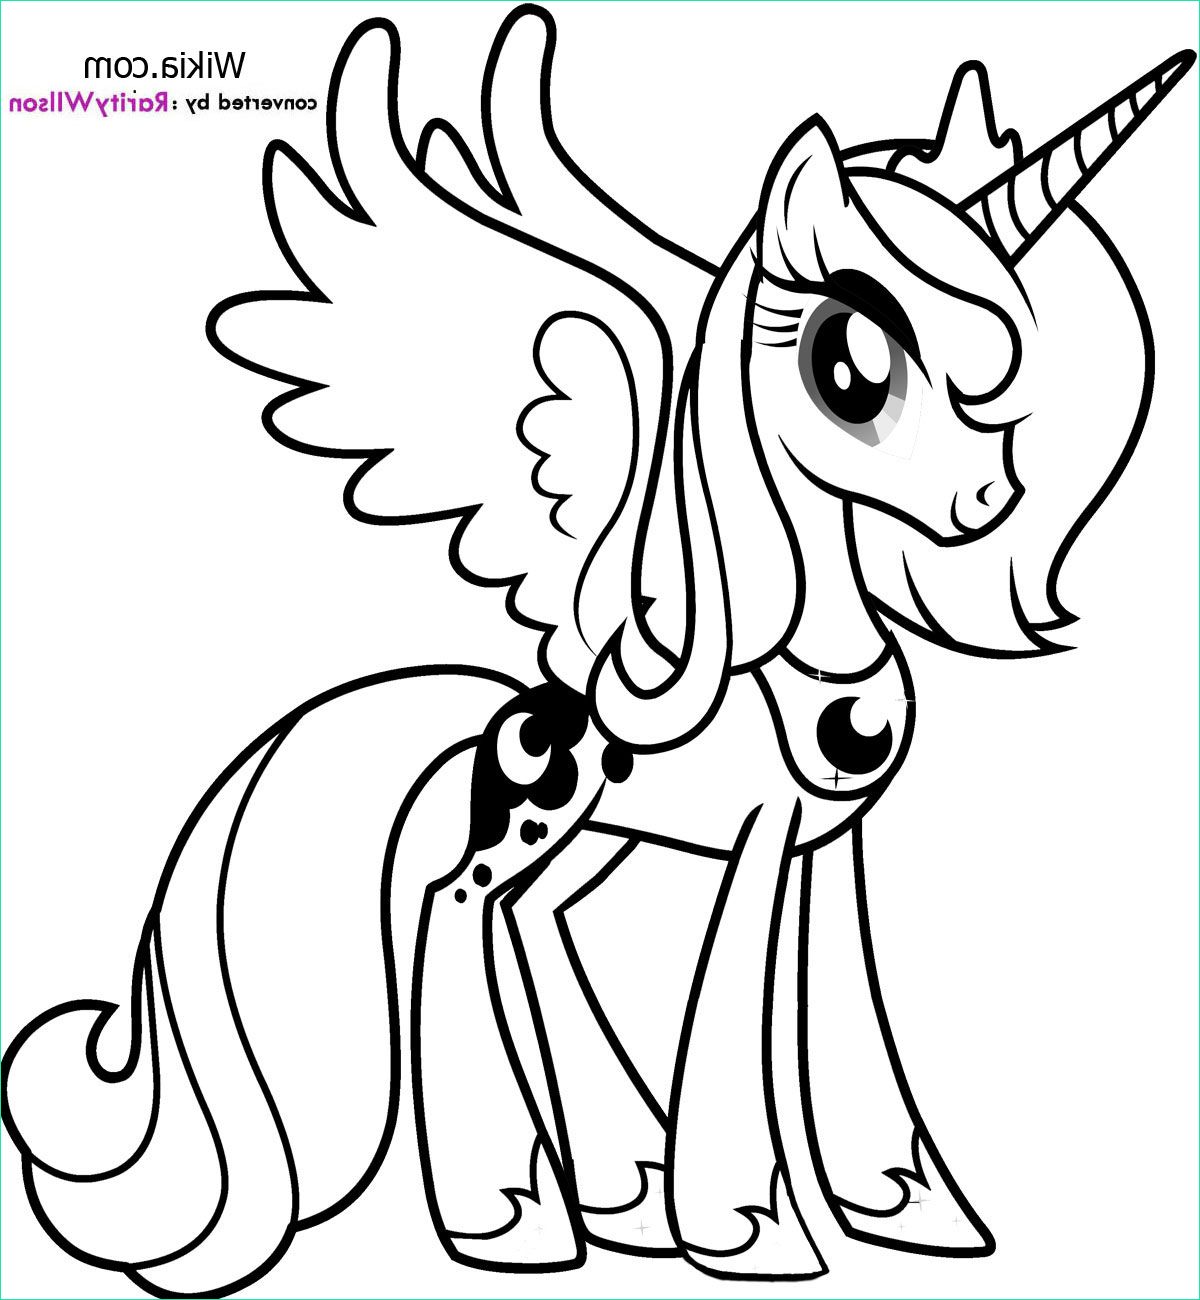 Coloriages My Little Pony Impressionnant Photographie Dessin à Colorier My Little Pony A Colorier